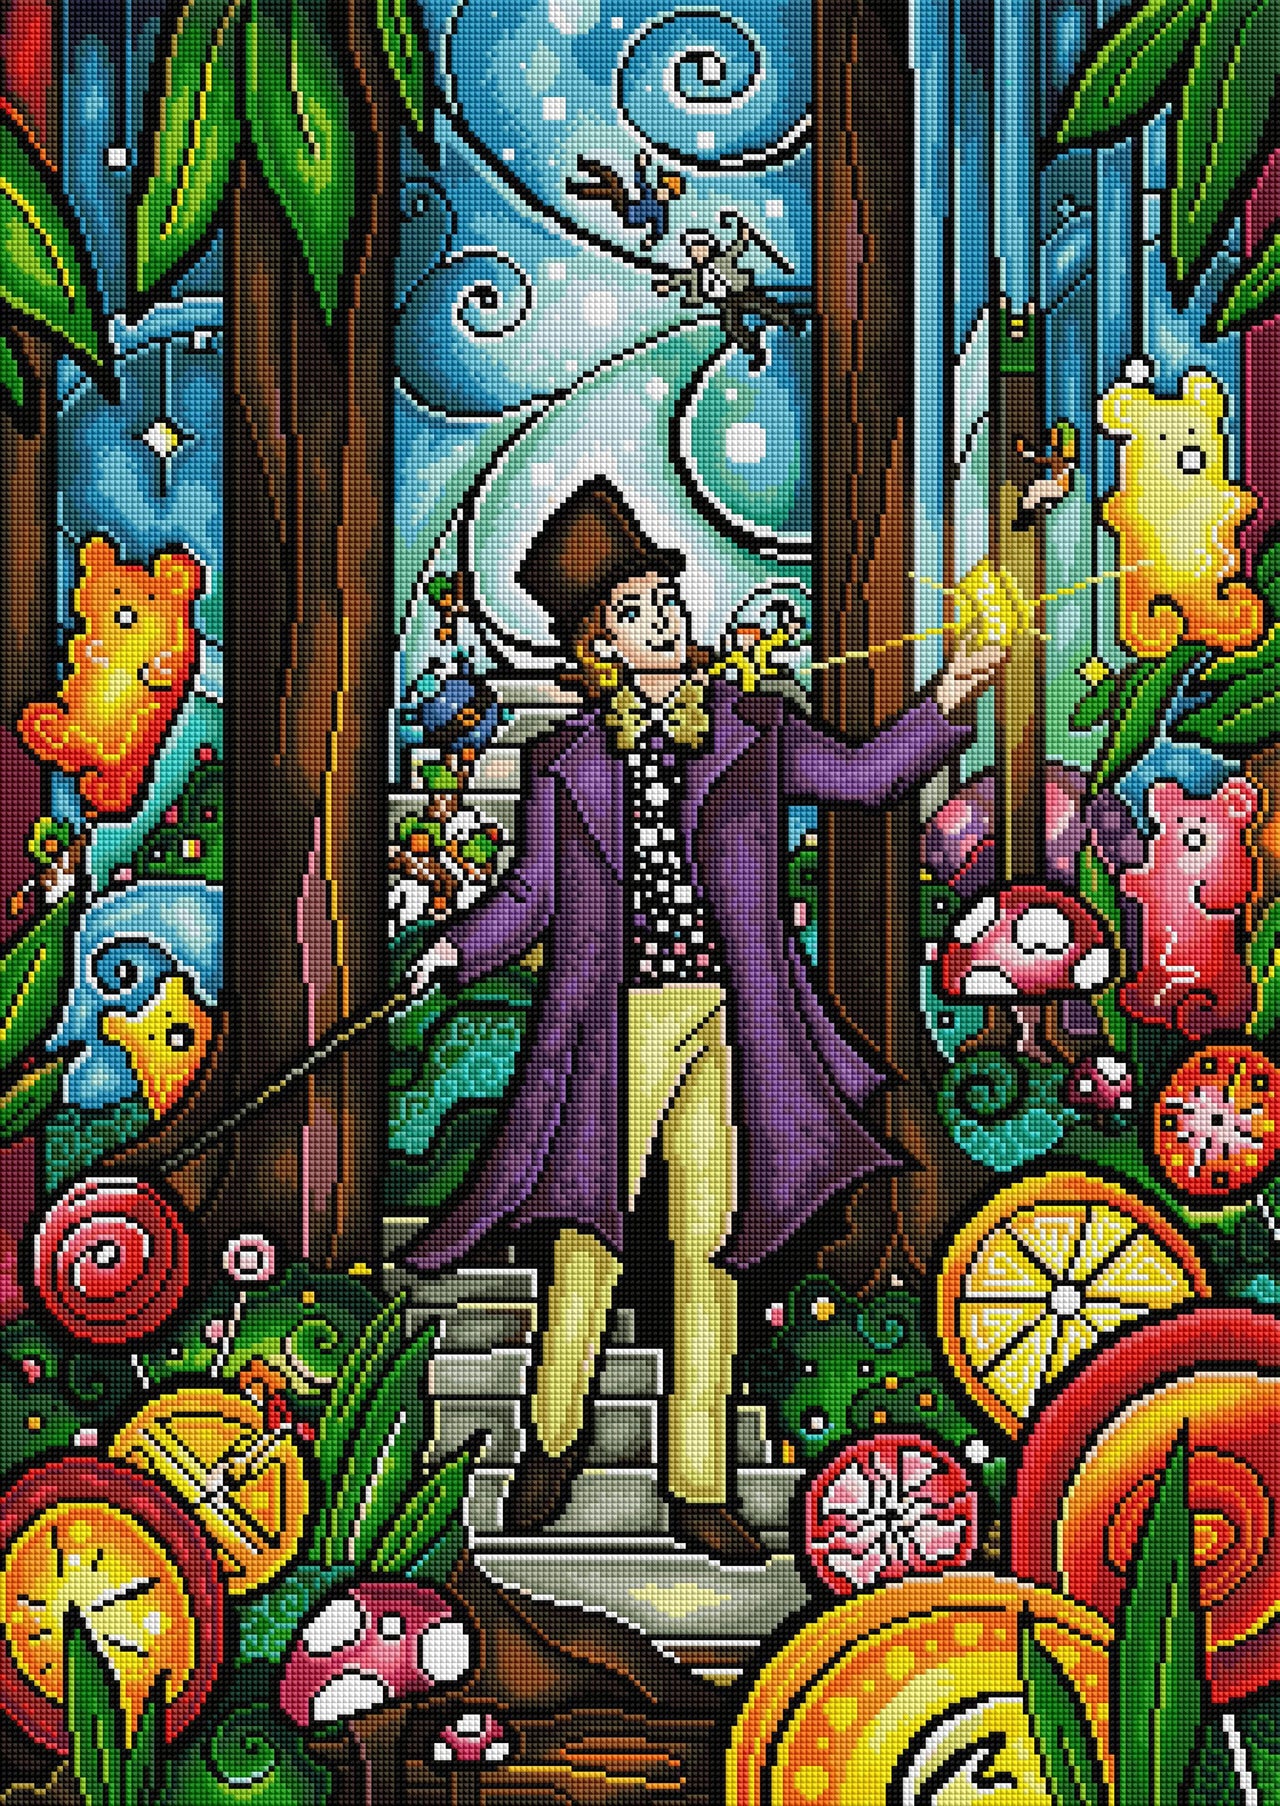 Diamond Painting Willy Wonka and the Chocolate Factory™ 22" x 31" (56cm x 79cm) / Square with 67 Colors including 4 ABs / 70,784